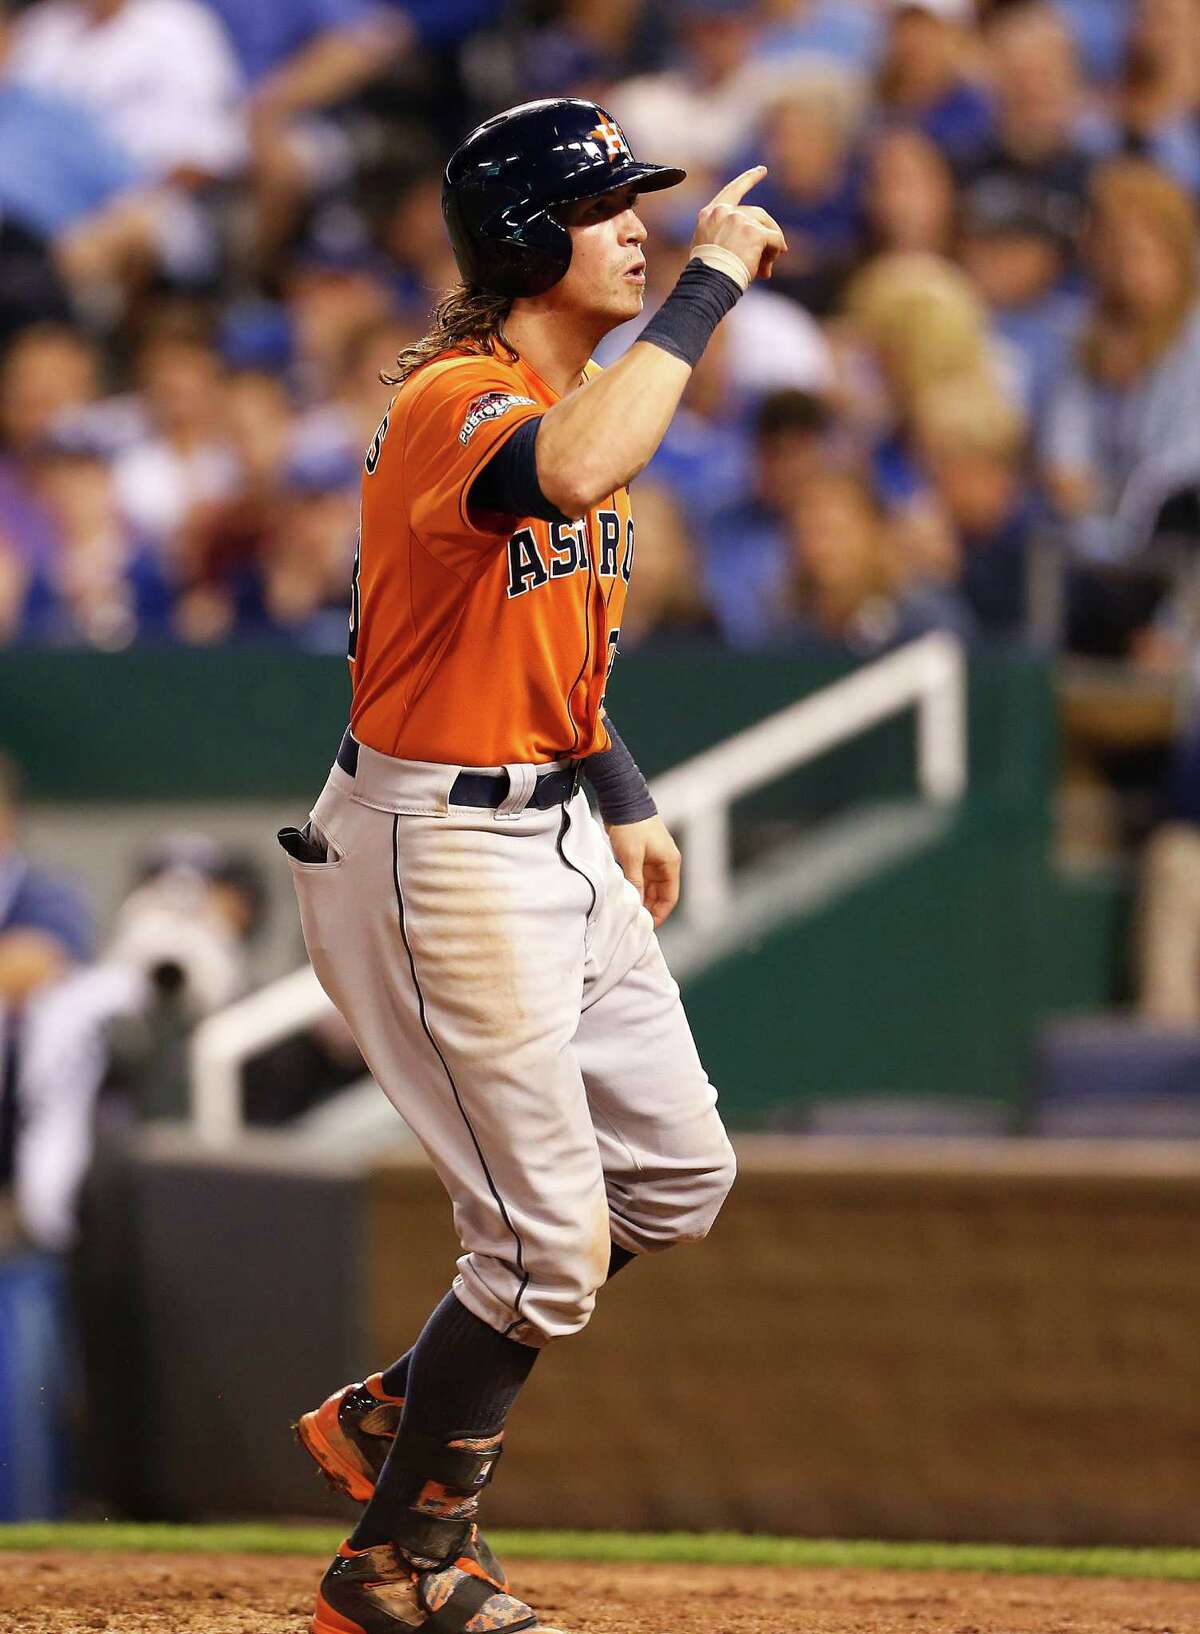 Left fielder Colby Rasmus, who played well down the stretch, might cost the Astros extra if he returns in 2015.